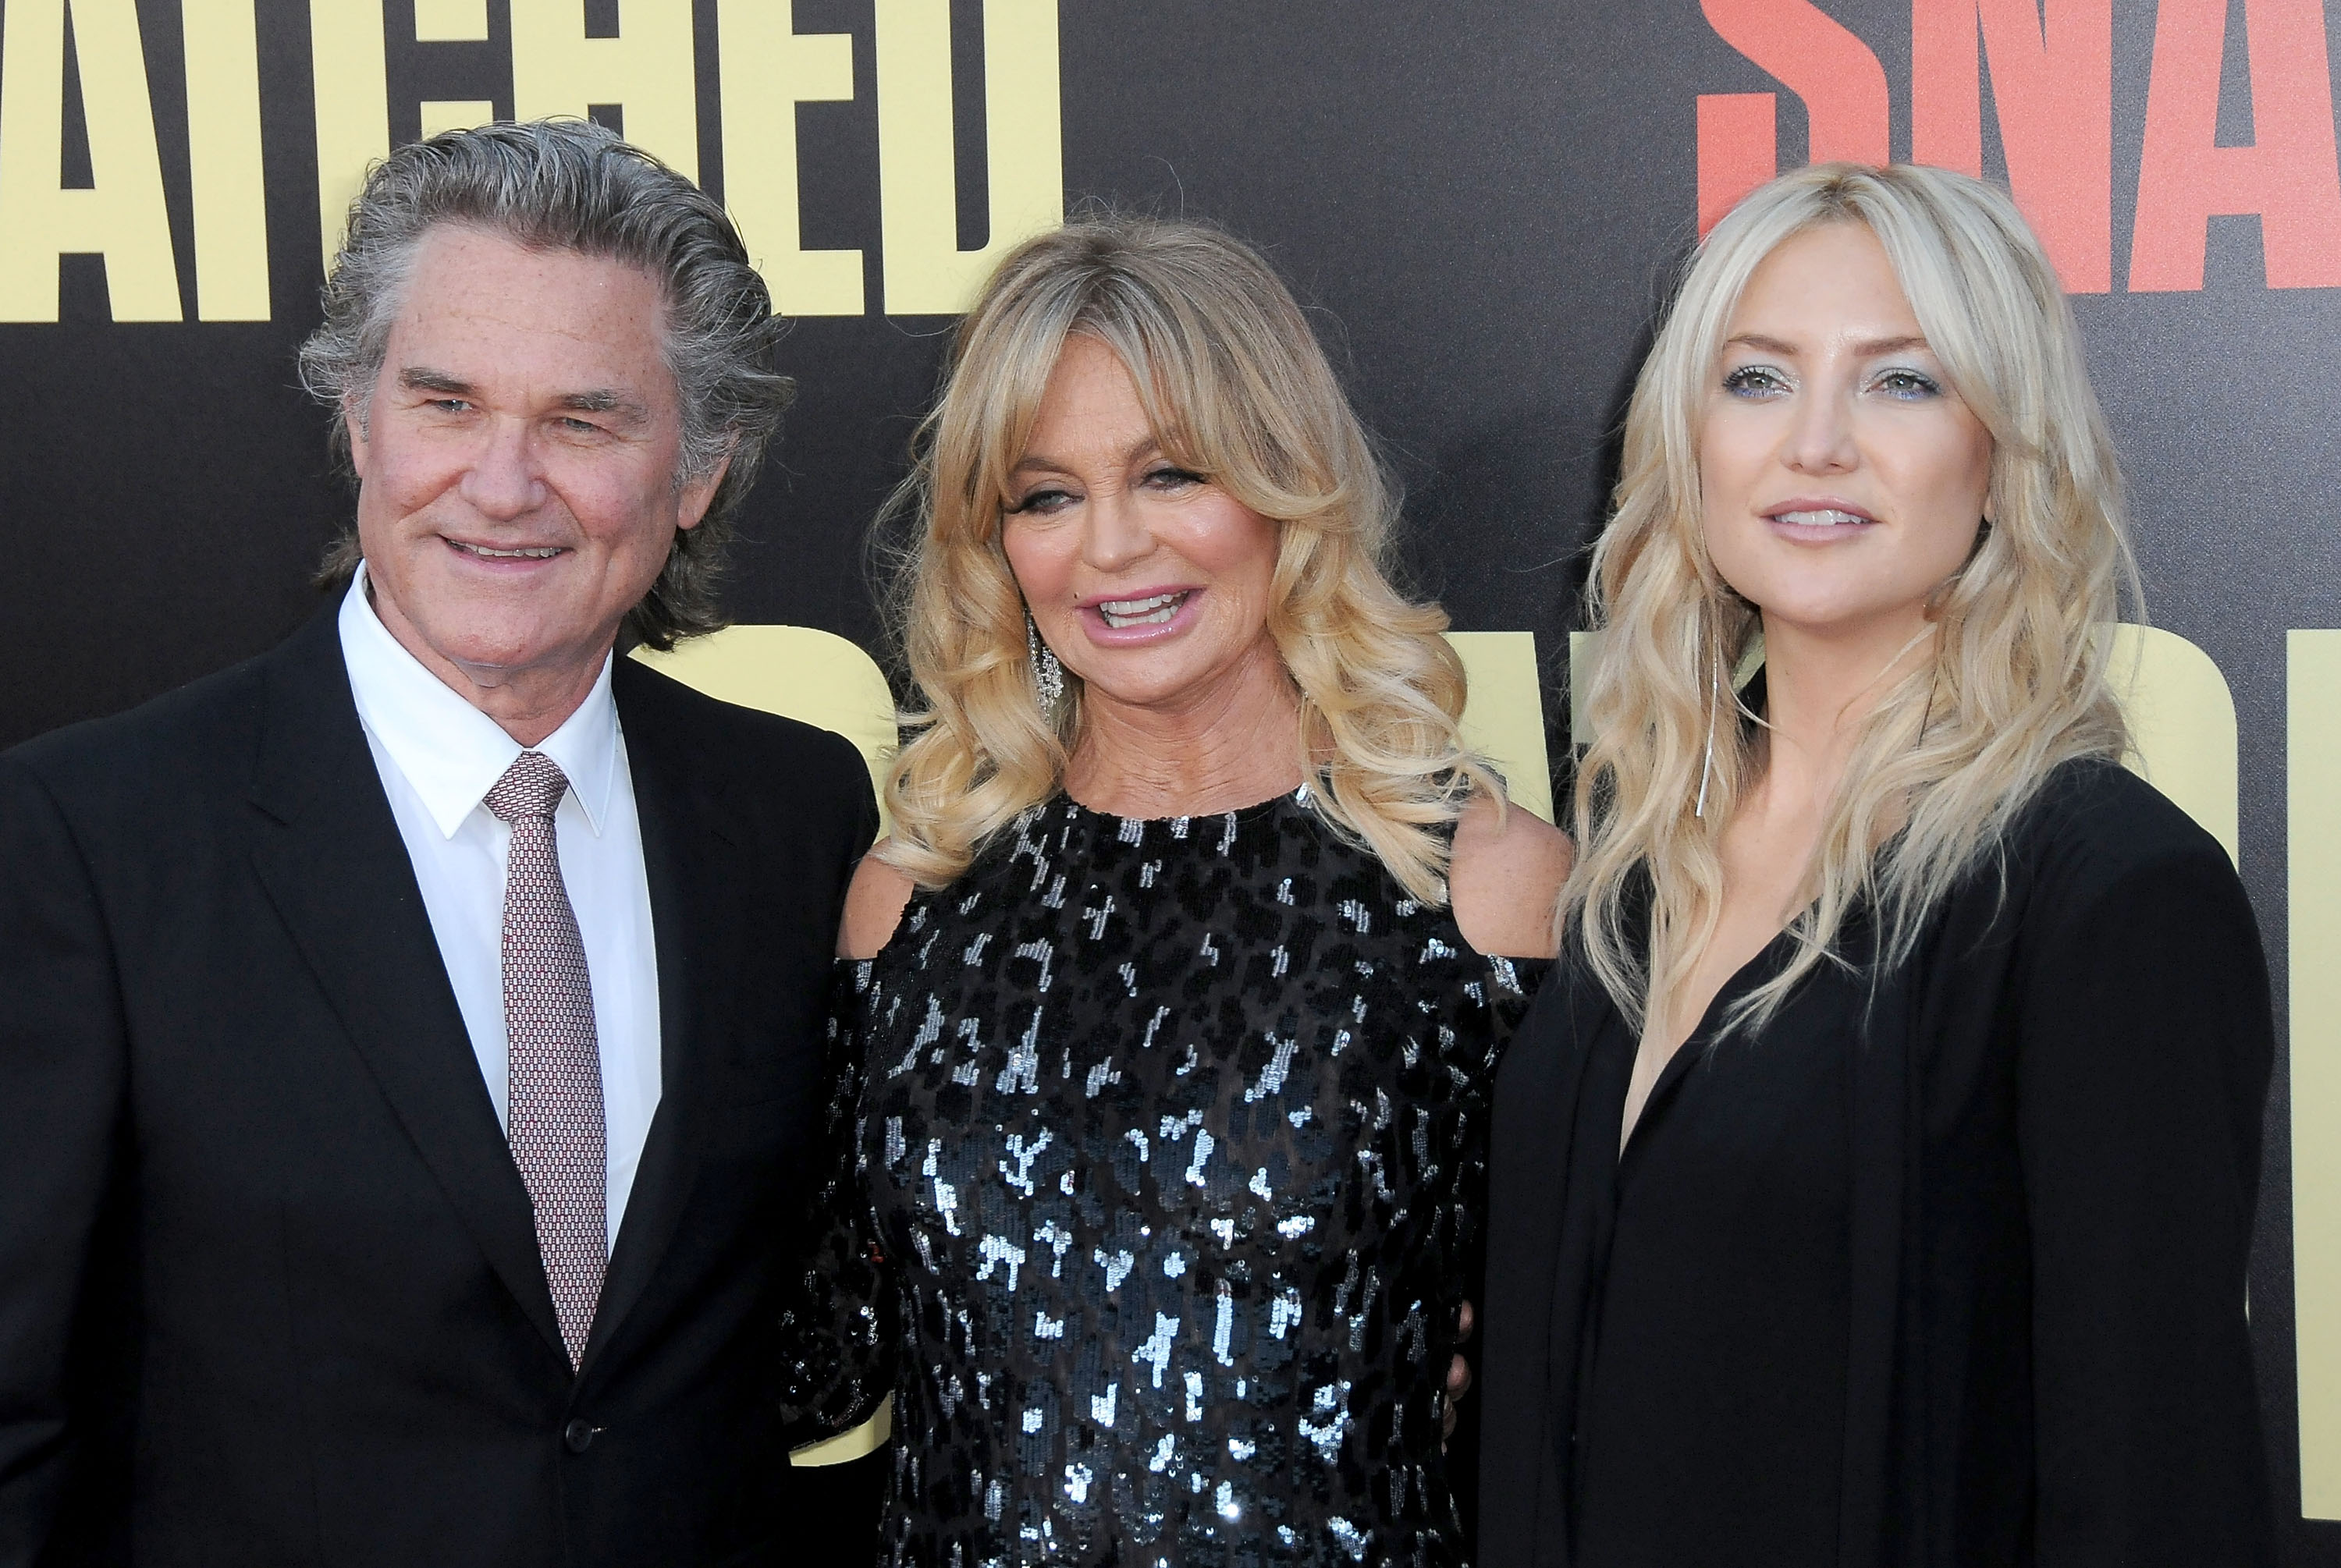 Kurt Russell, actresses Goldie Hawn and Kate Hudson attend premiere of 20th Century Fox's' 'Snatched' at Regency Village Theatre on May 10, 2017 in Westwood, California. | Source: Getty Images